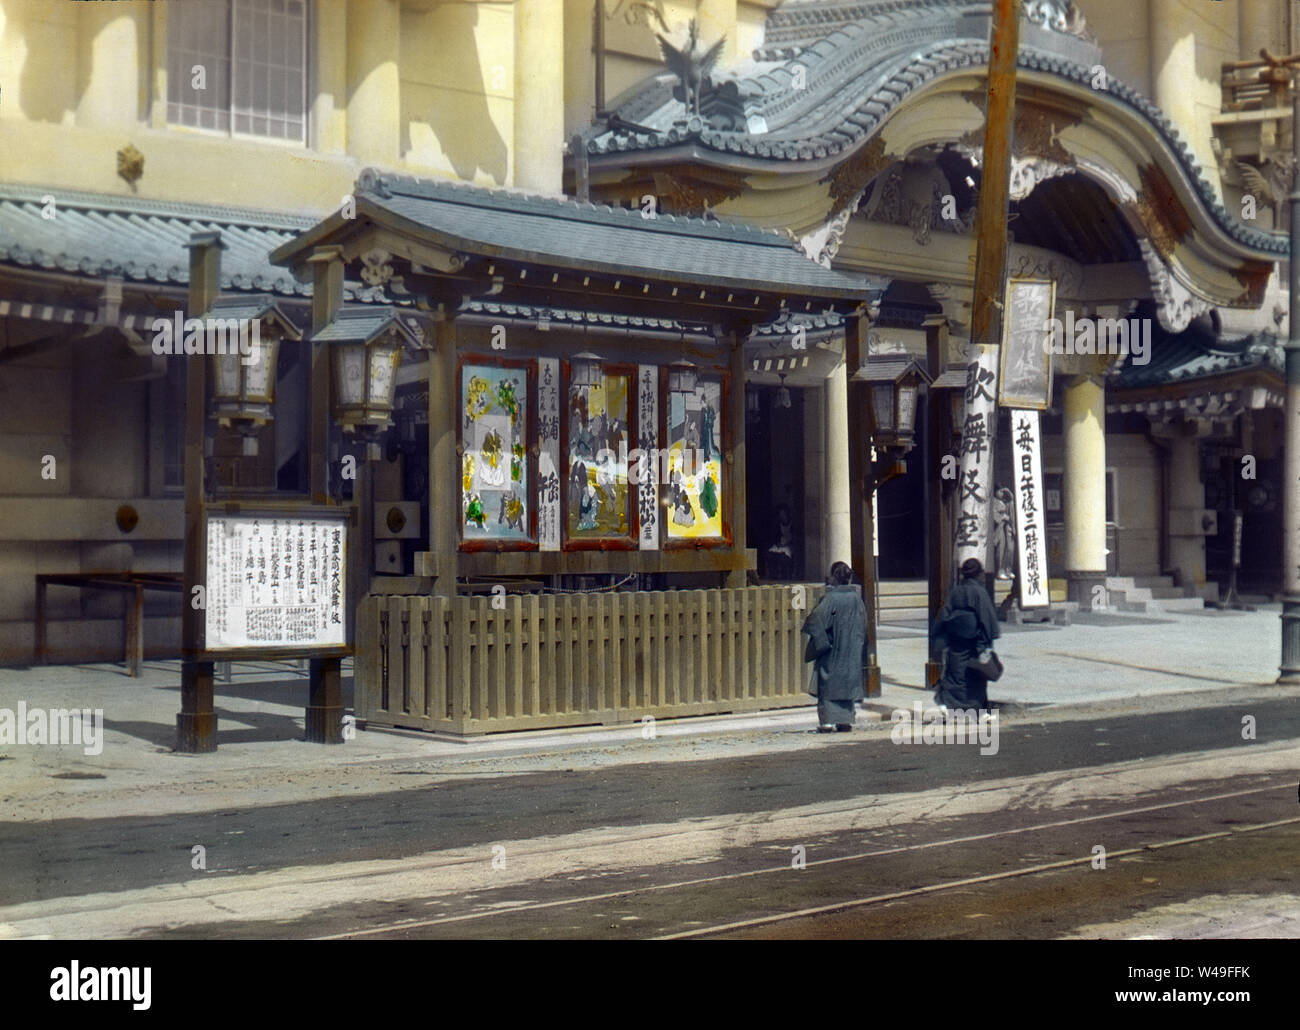 [ 1910s Japan - Tokyo Kabuki Theater ] —   Two Japanese women in front of Kabukiza, a theater for kabuki performances, in Ginza, Tokyo. The original Kabukiza was established in 1889 (Meiji 22). It was replaced with the building on this image in 1911 (Meiji 44). This structure was destroyed by fire in 1921 (Taisho 10), after which a new building was built in baroque Japanese revivalist style. This was demolished in 2010 (Heisei 22) to make way for a larger modern structure. The theater has been run by the Shochiku Corporation (松竹株式会社) since 1914 (Taisho 3).  20th century vintage glass slide. Stock Photo